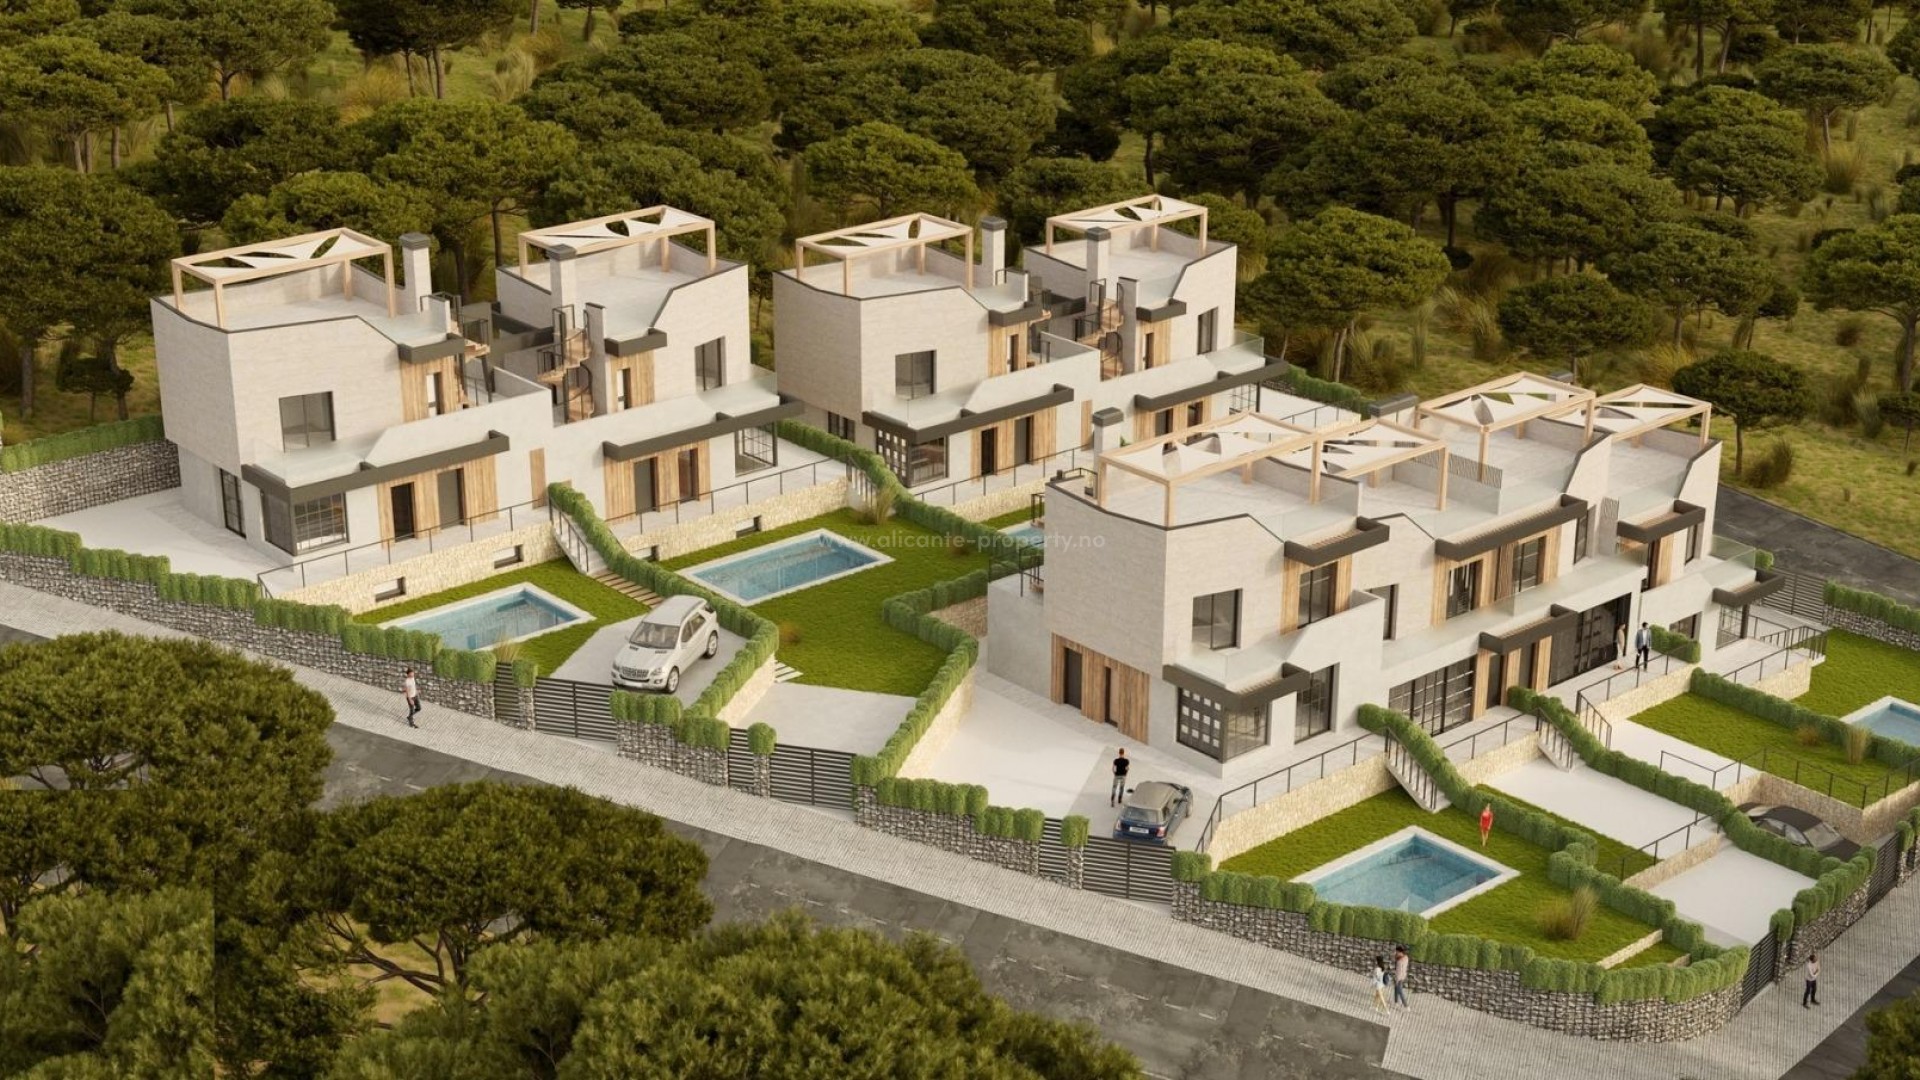 Semi-detached houses and townhouses in Polop, 3 bedrooms, 2 bathrooms, private pool, several terraces and solarium, fenced parking